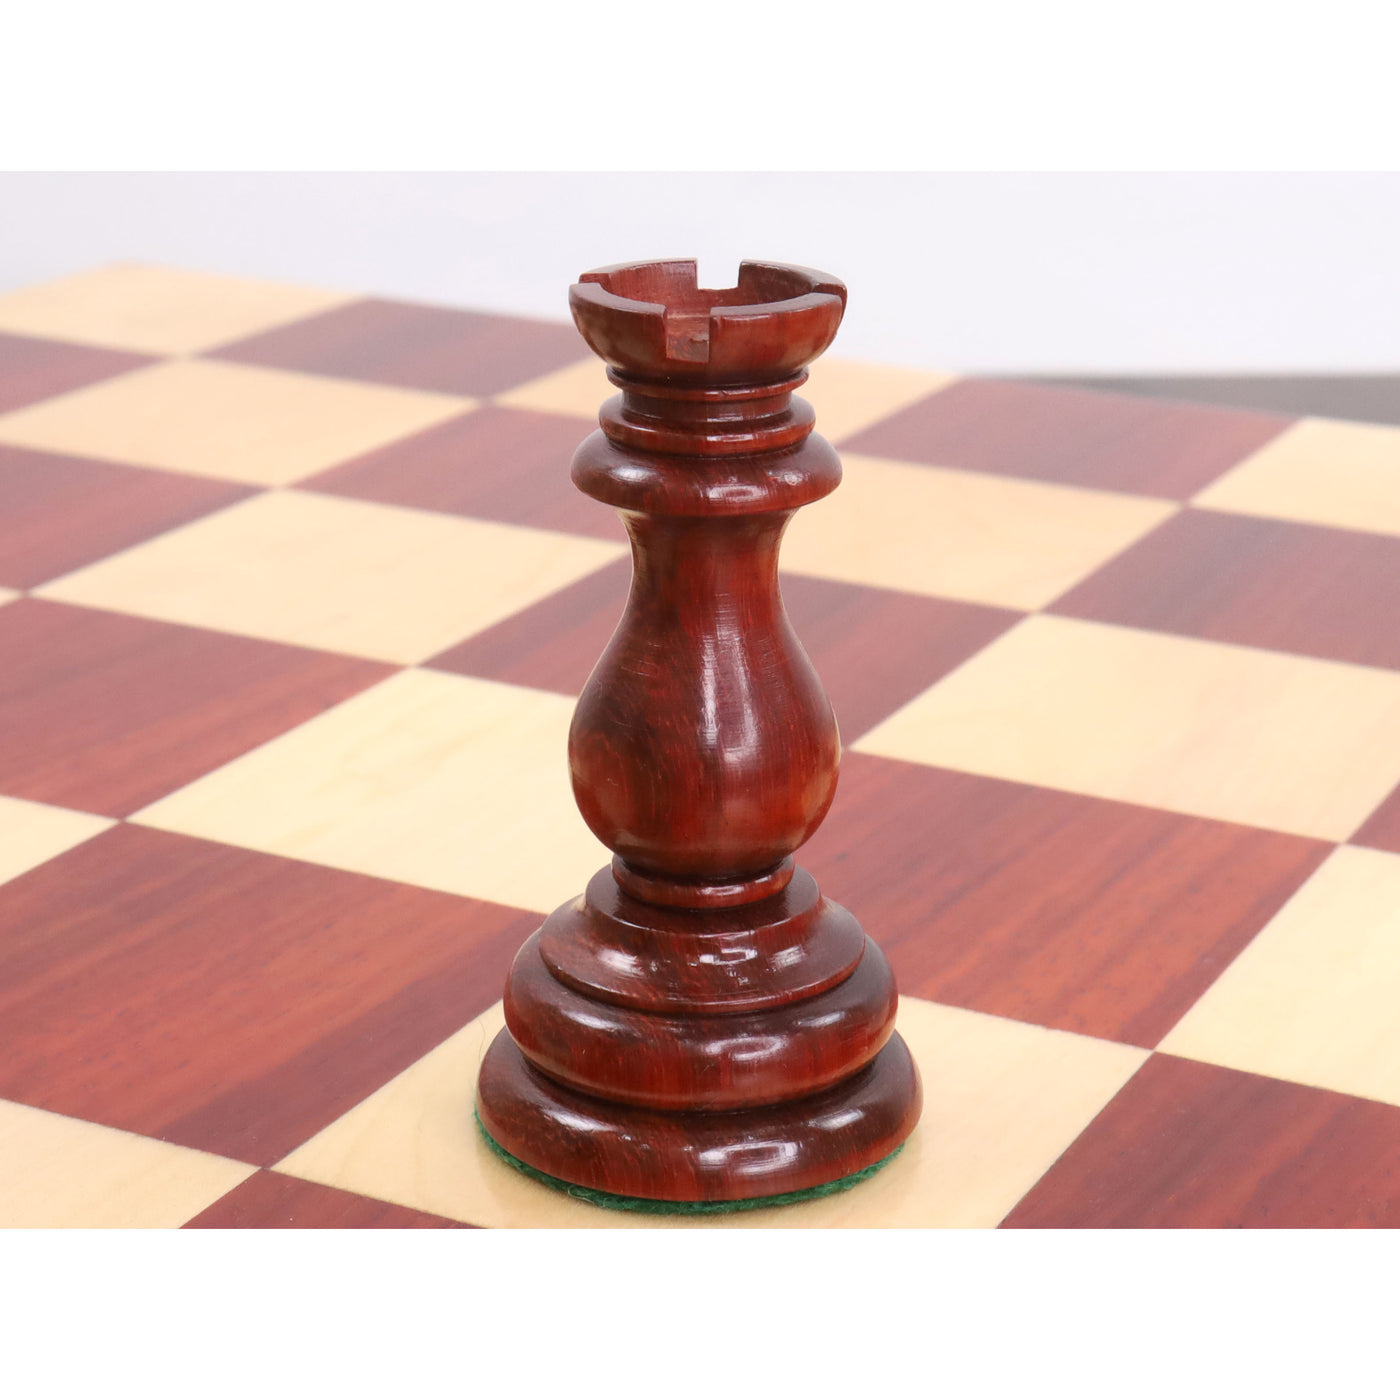 4.6" Medallion Luxury Staunton Chess Pieces Only Set -Triple Weight Bud Rosewood